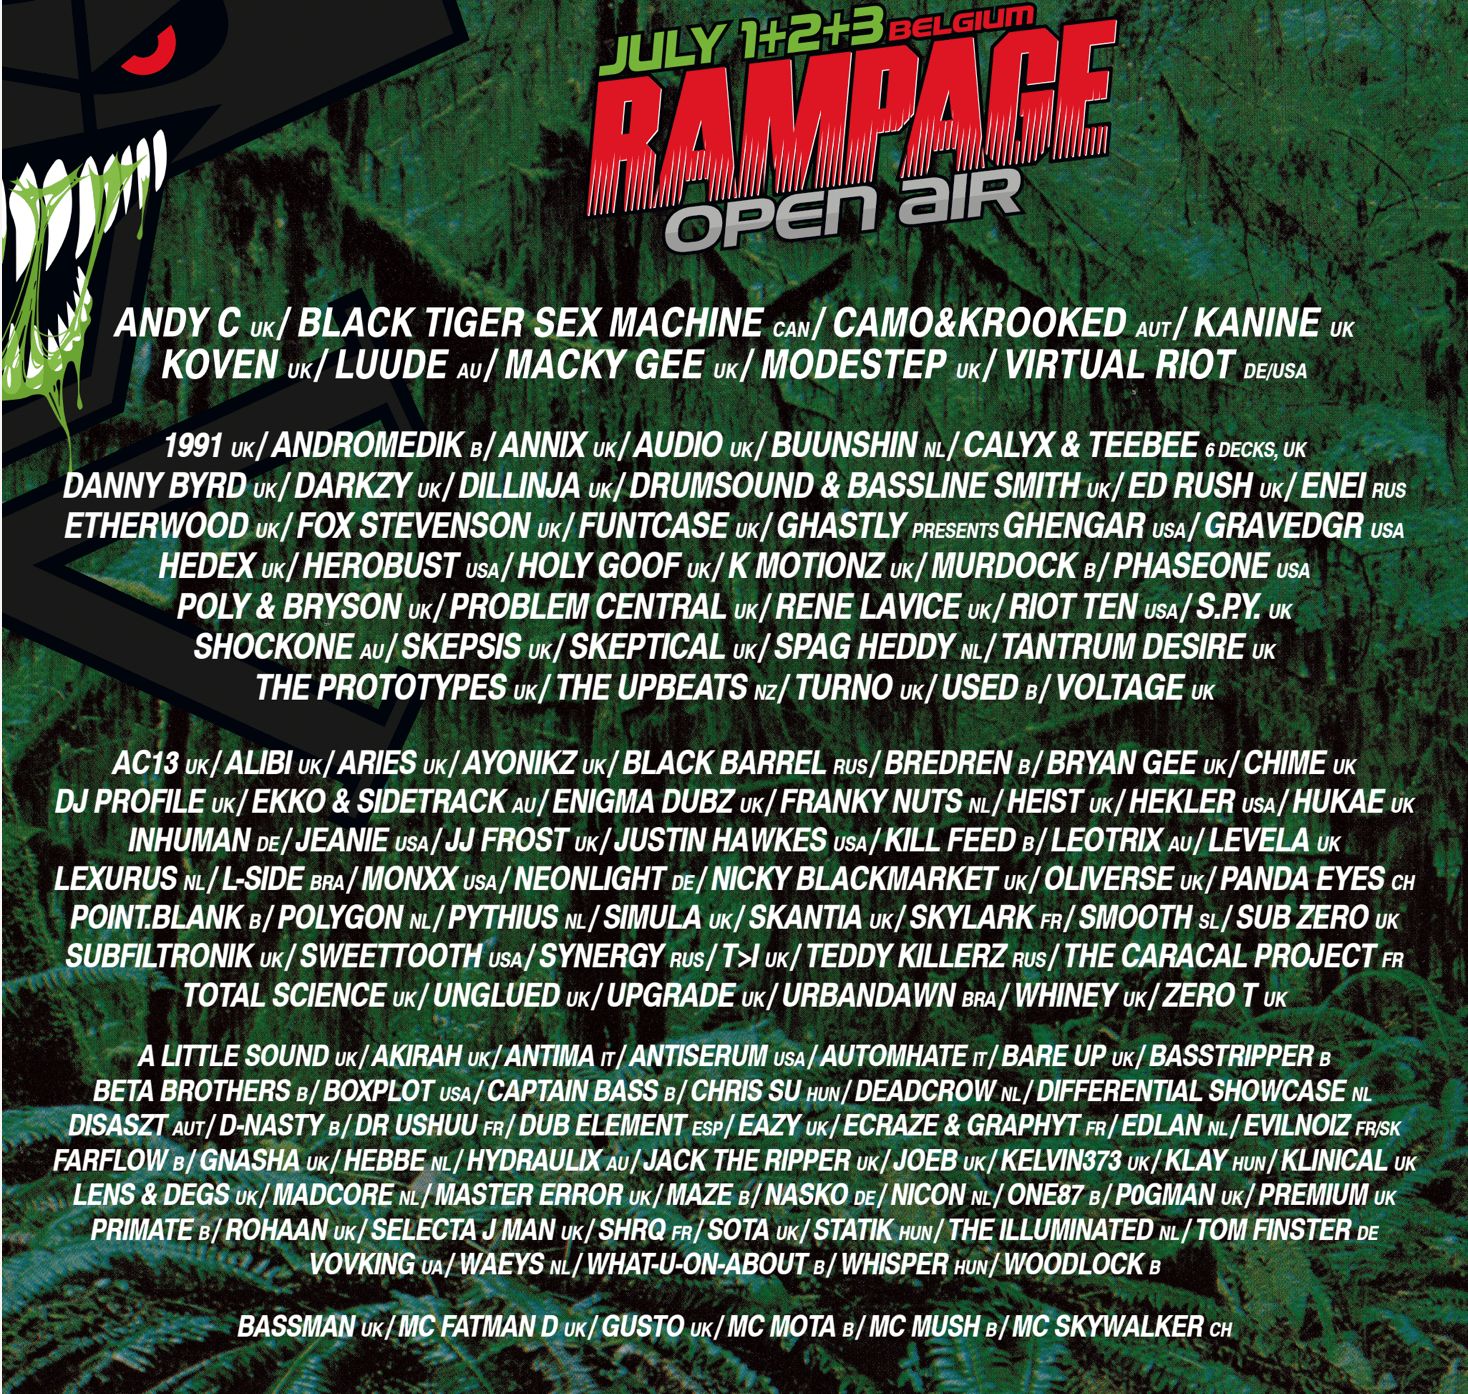 New Artists announced for Rampage Open Air!